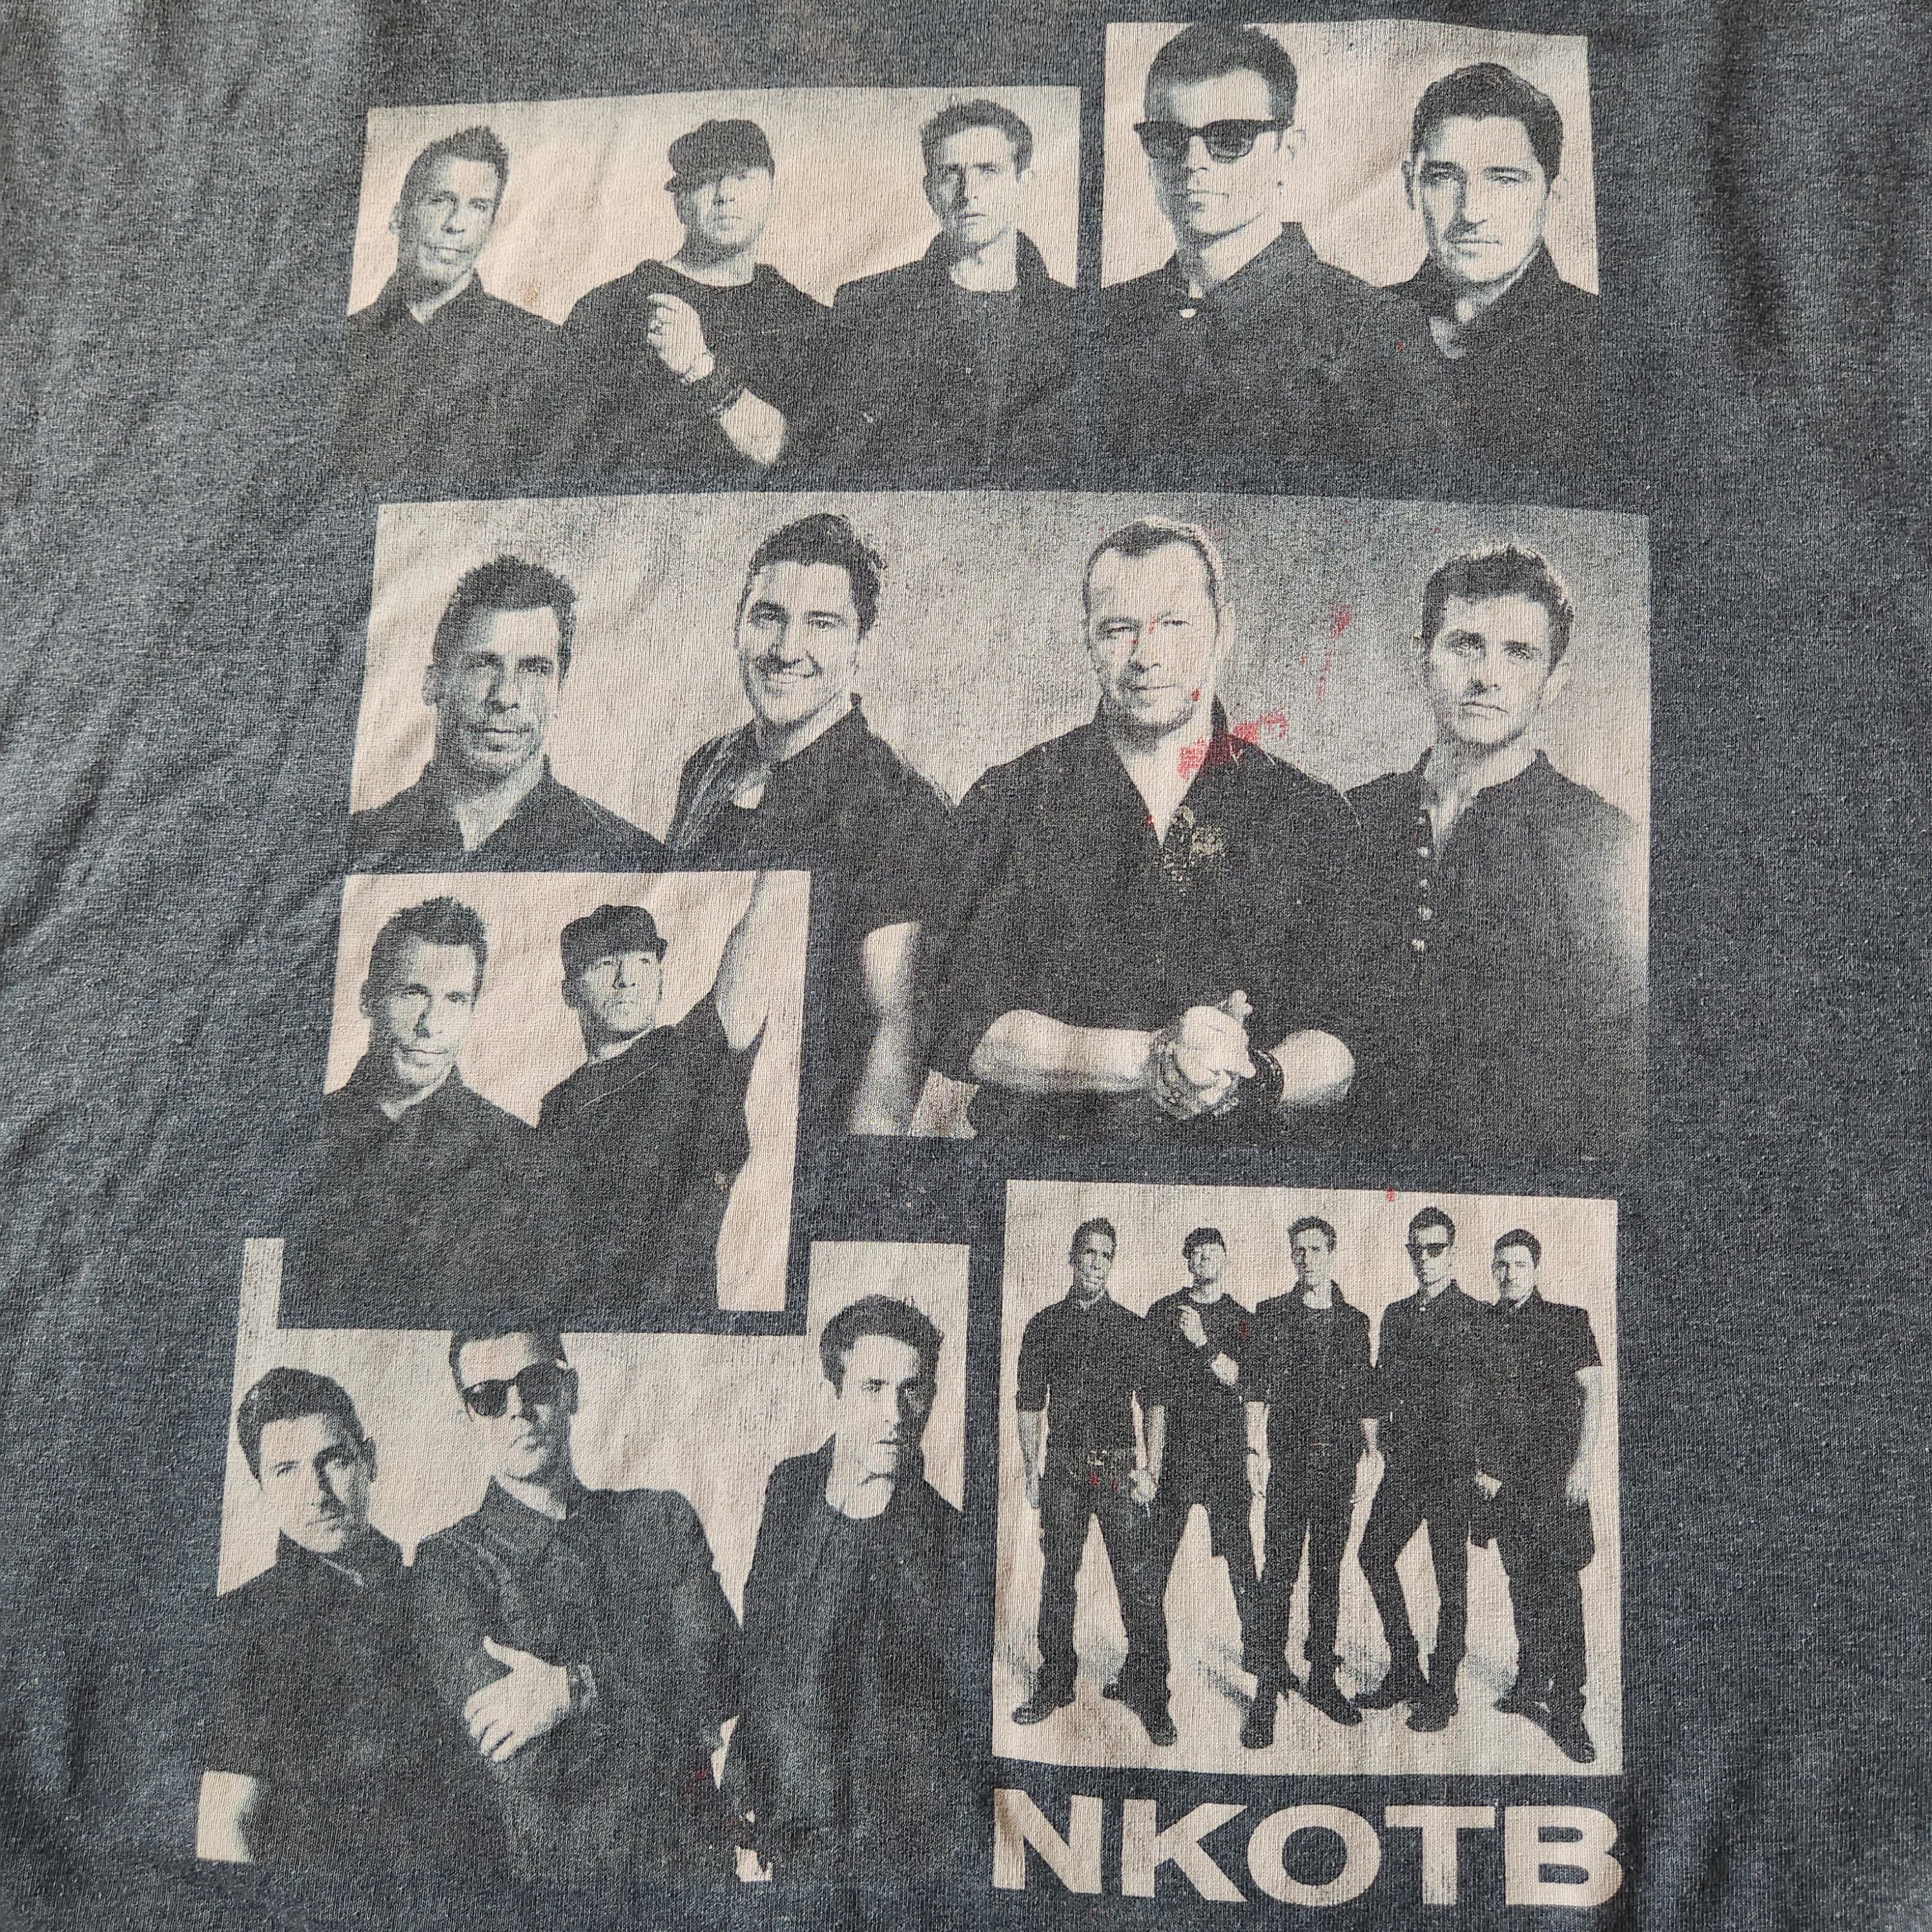 Band Tees - New Kids On The Block TShirt Copyright 2015 - 4